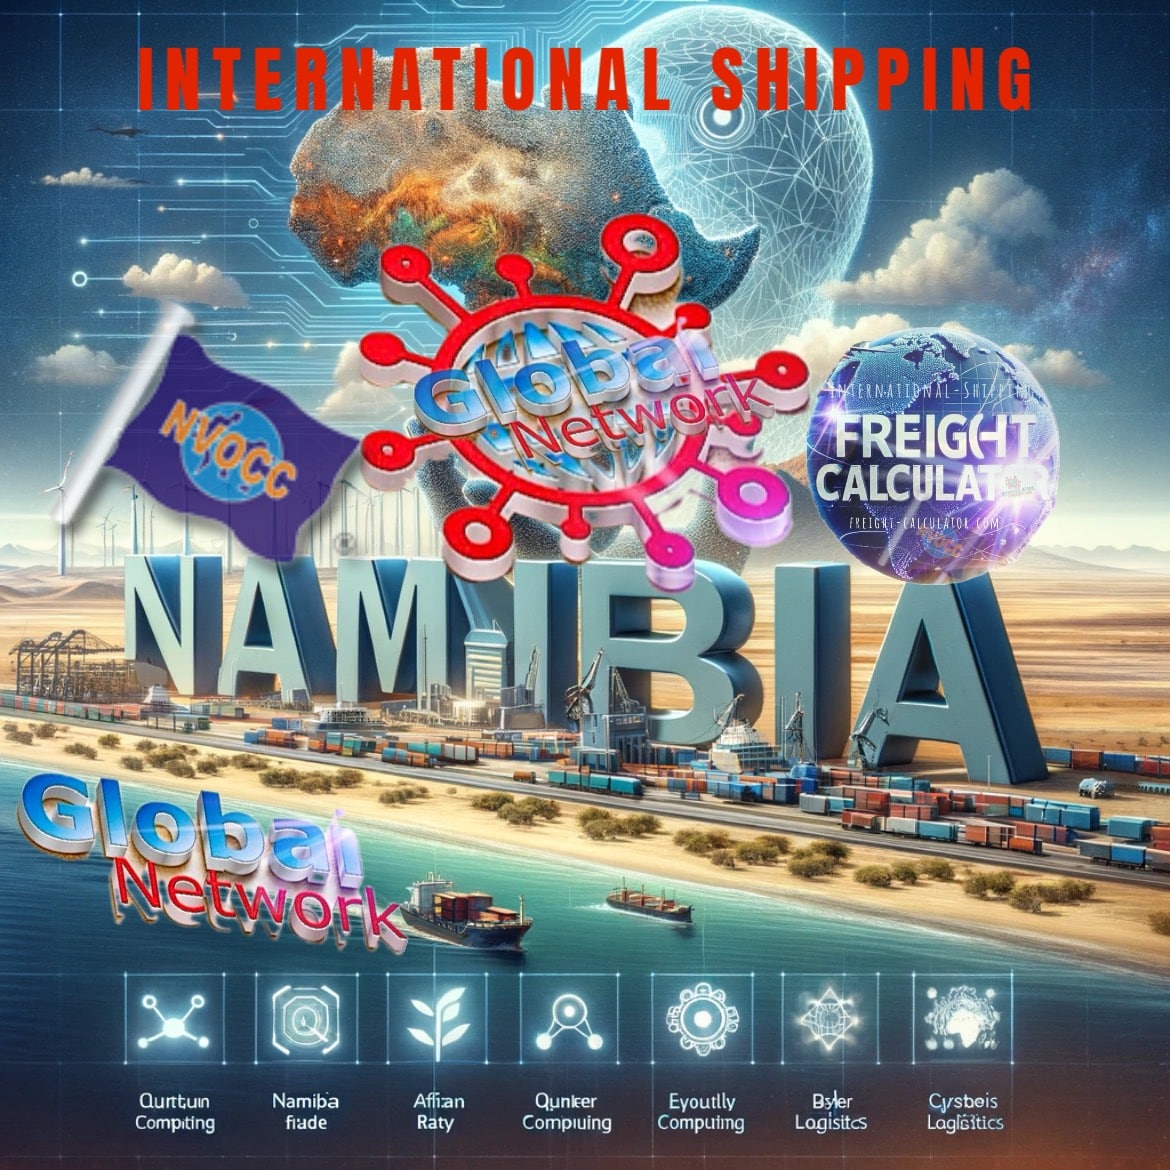 Shipping to Namibia